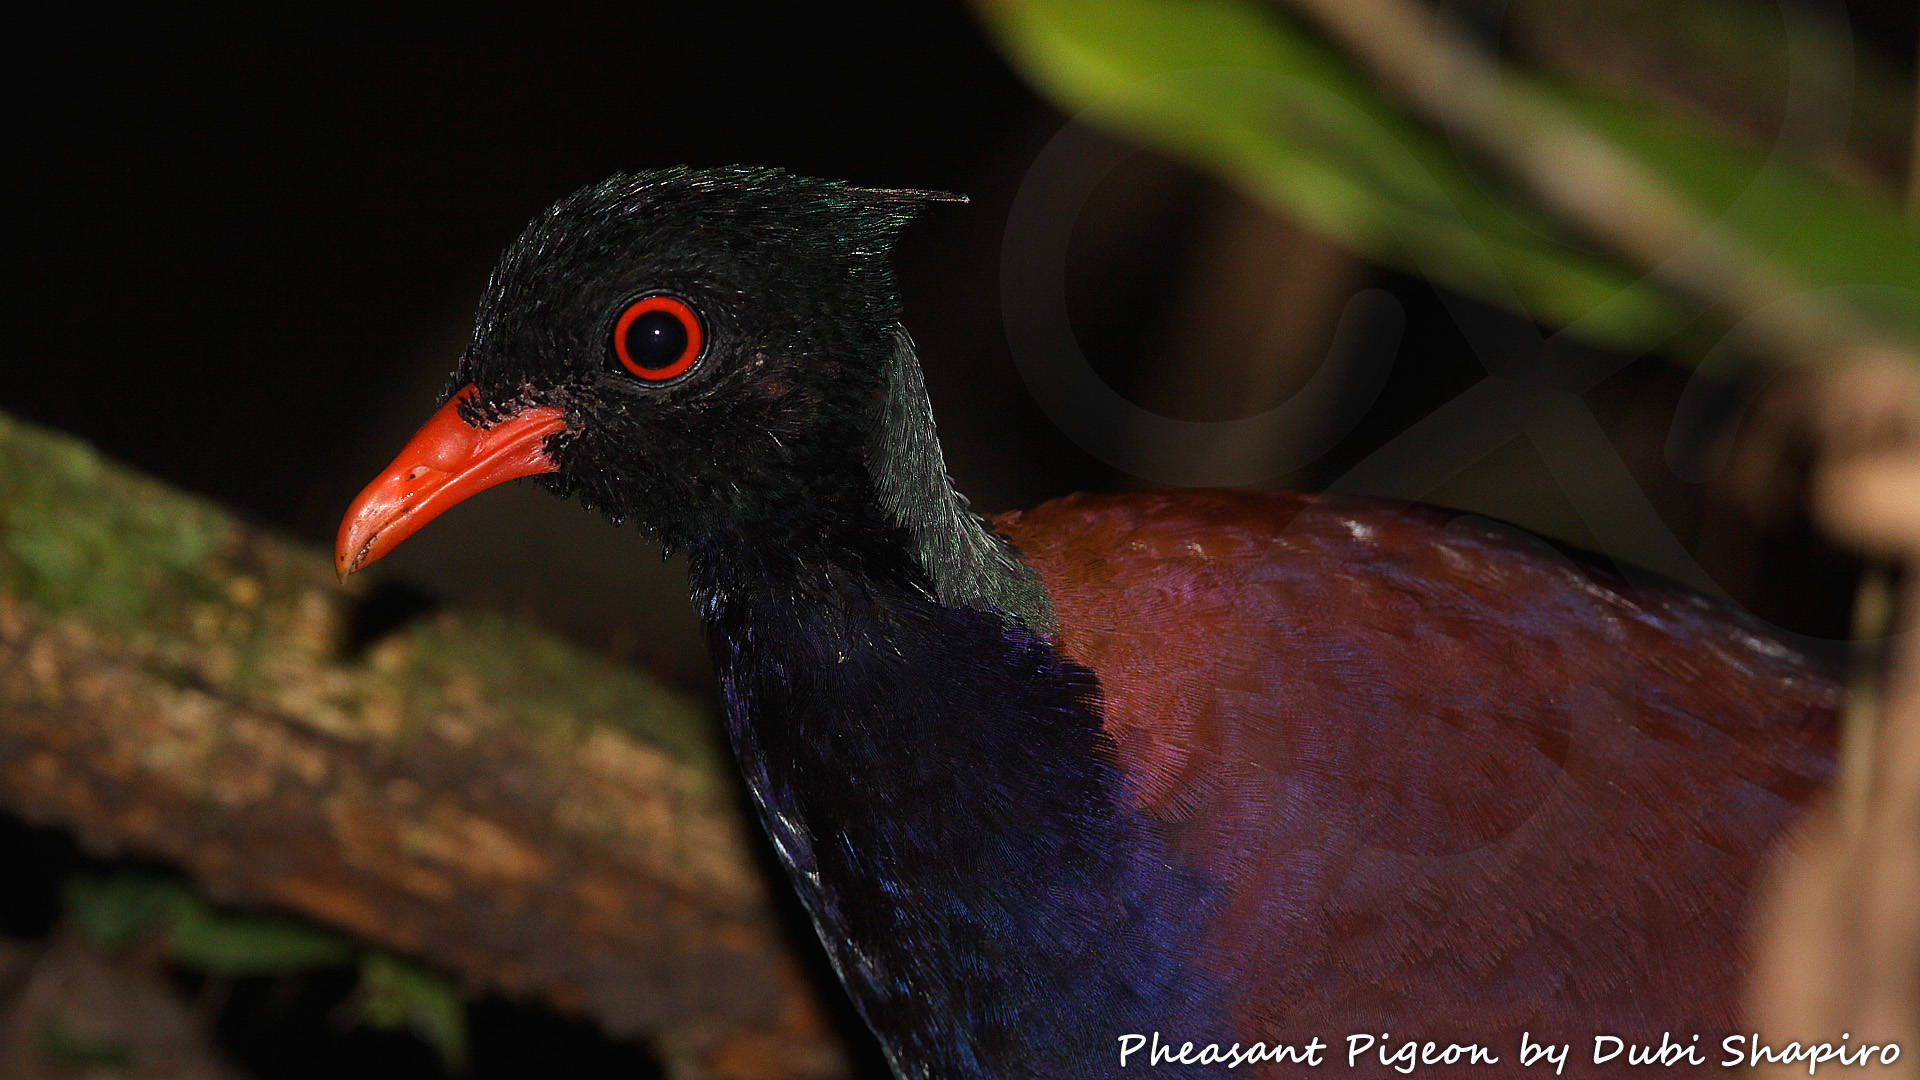 New Guinea forest bird communities differ markedly from elsewhere in featuring an unusually high proportion of ground-dwellers like this strange Pheasant Pigeon Otidiphaps nobilis which belongs in its own genus and is among 288 bird species in West Papua that are endemic to the New Guinea or Papuan avifaunal region. Copyright © Dubi Shapiro